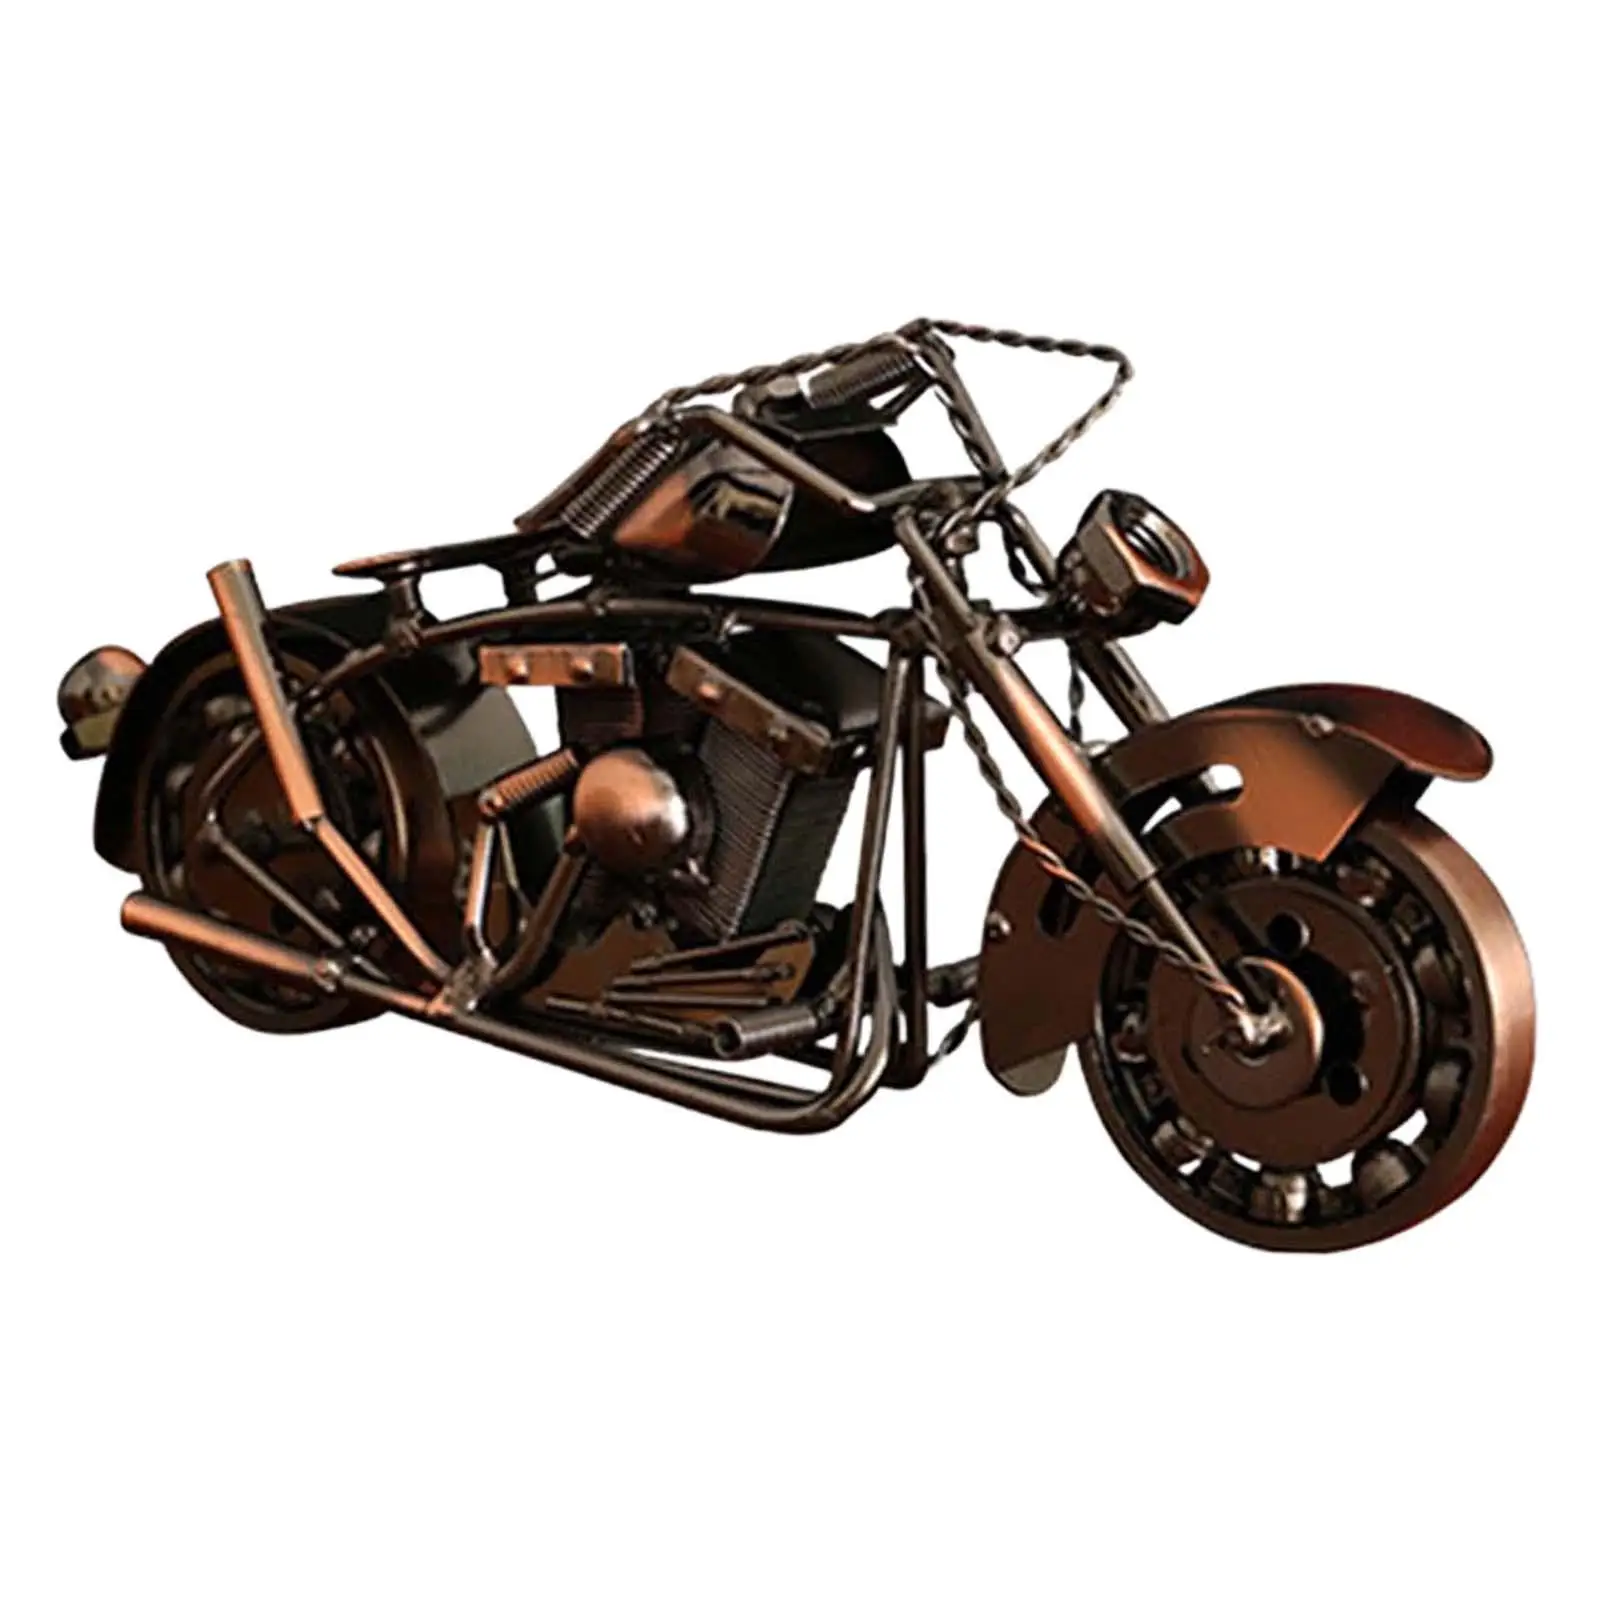 Motorcycle Model Motorbike Iron Art Sculpture Decoration for